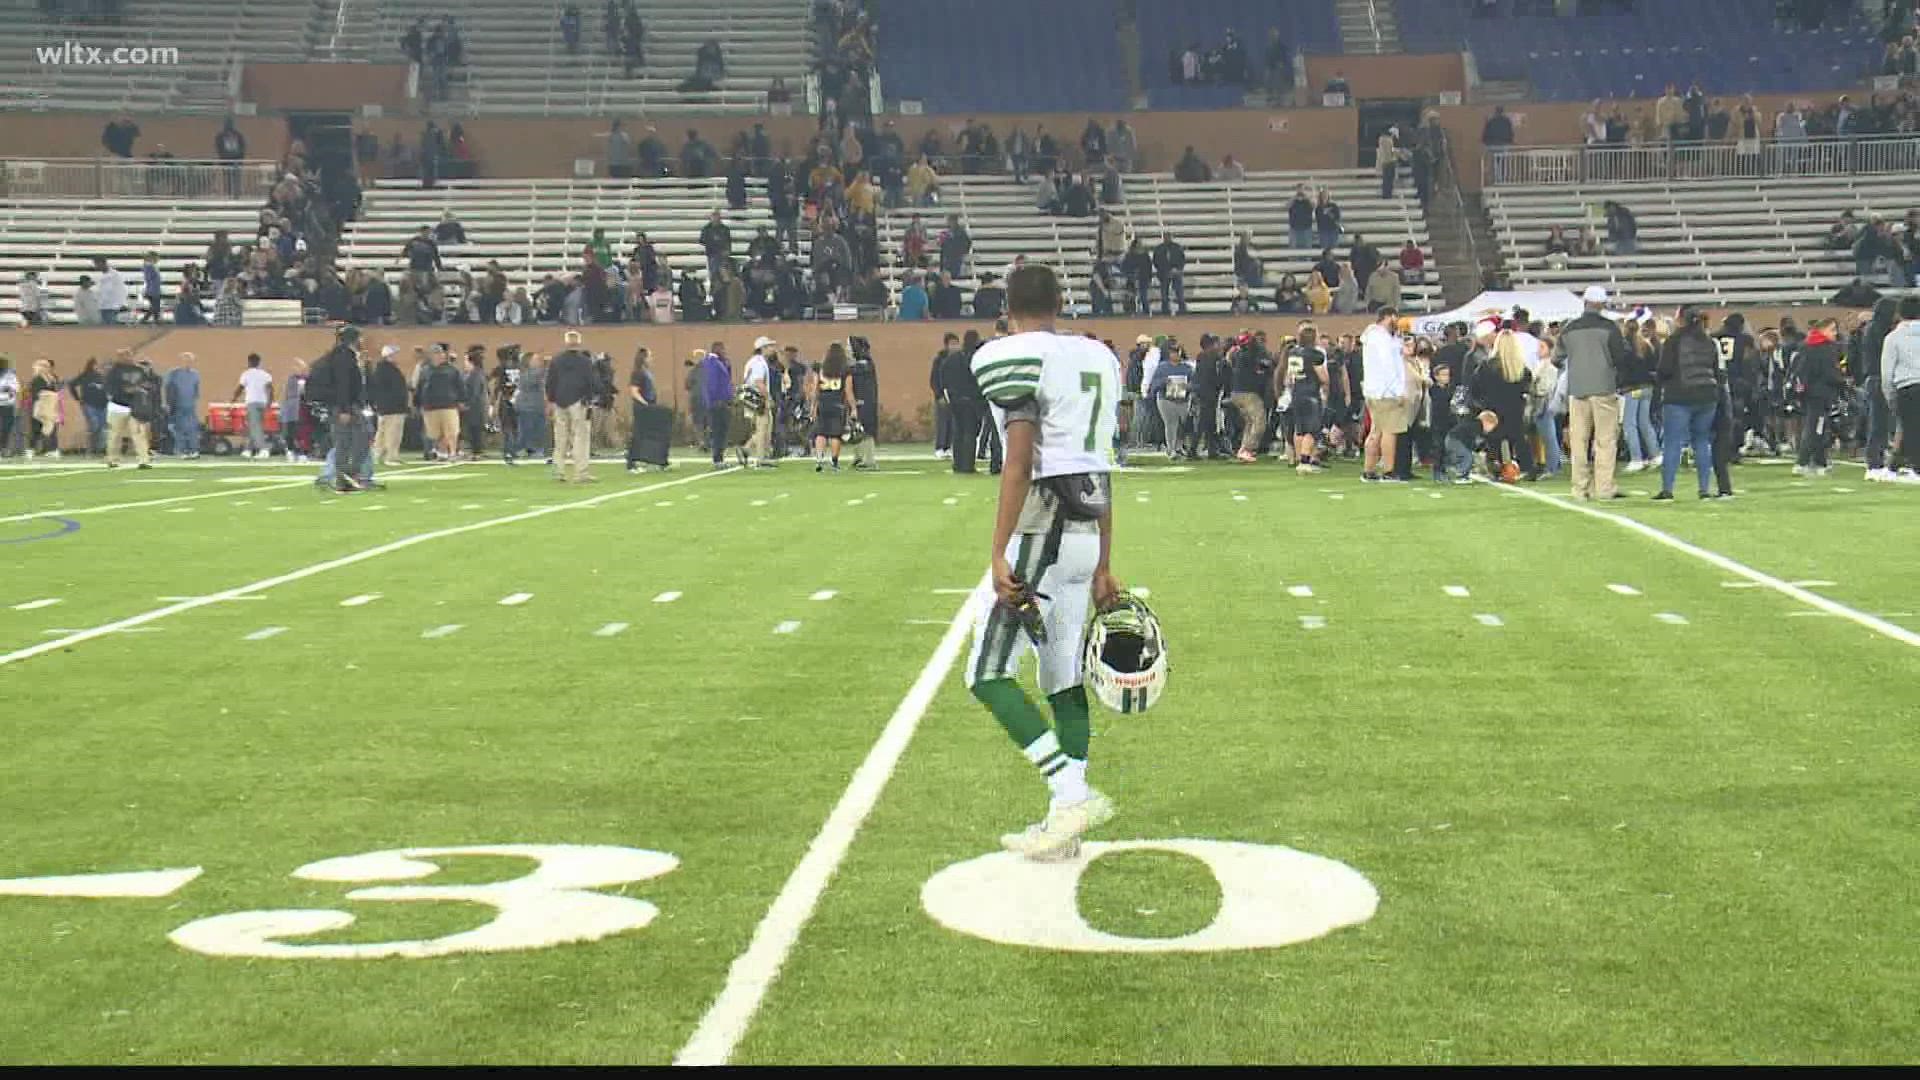 Dutch Fork's bid for a sixth consecutive 5A state championship comes up short as Gaffney outduels the Silver Foxes 22-19.